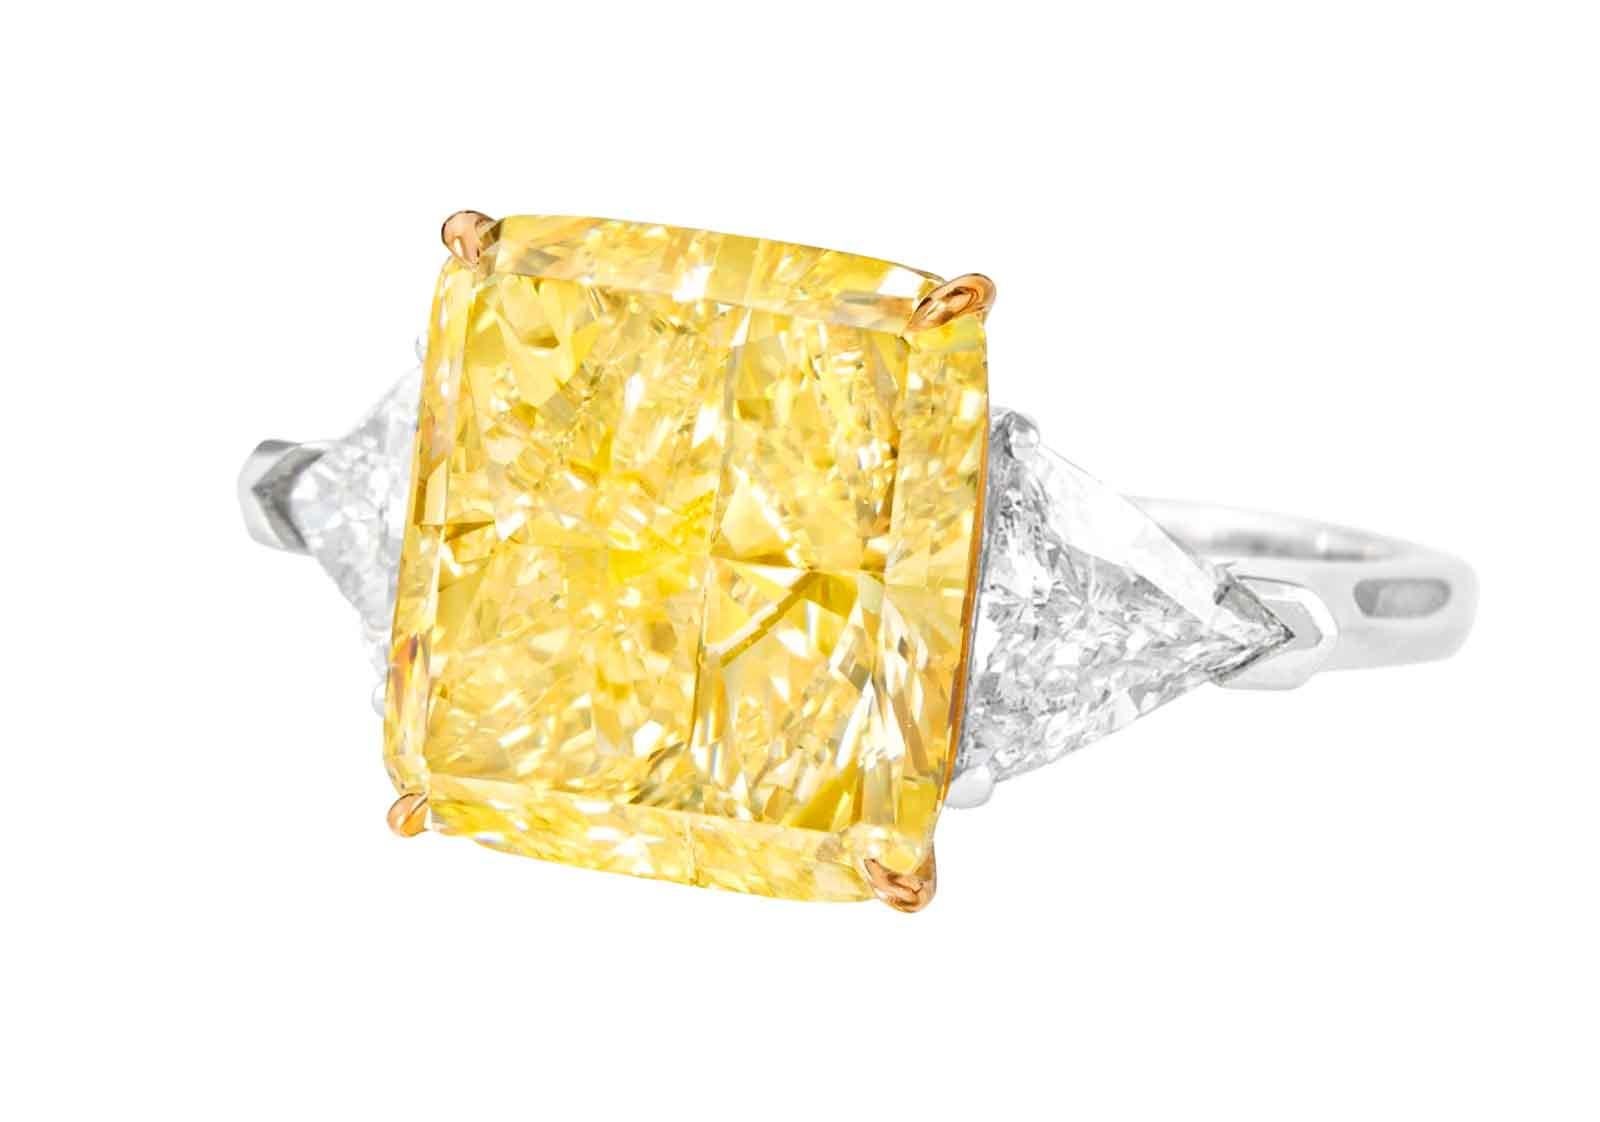 This luxurious ring is centered around an extraordinary 4.32 ct Cushion Modified diamond, a jewel of unmatched allure and distinction. Certified by the Gemological Institute of America (GIA), this diamond boasts a Fancy Intense Yellow color, a rich